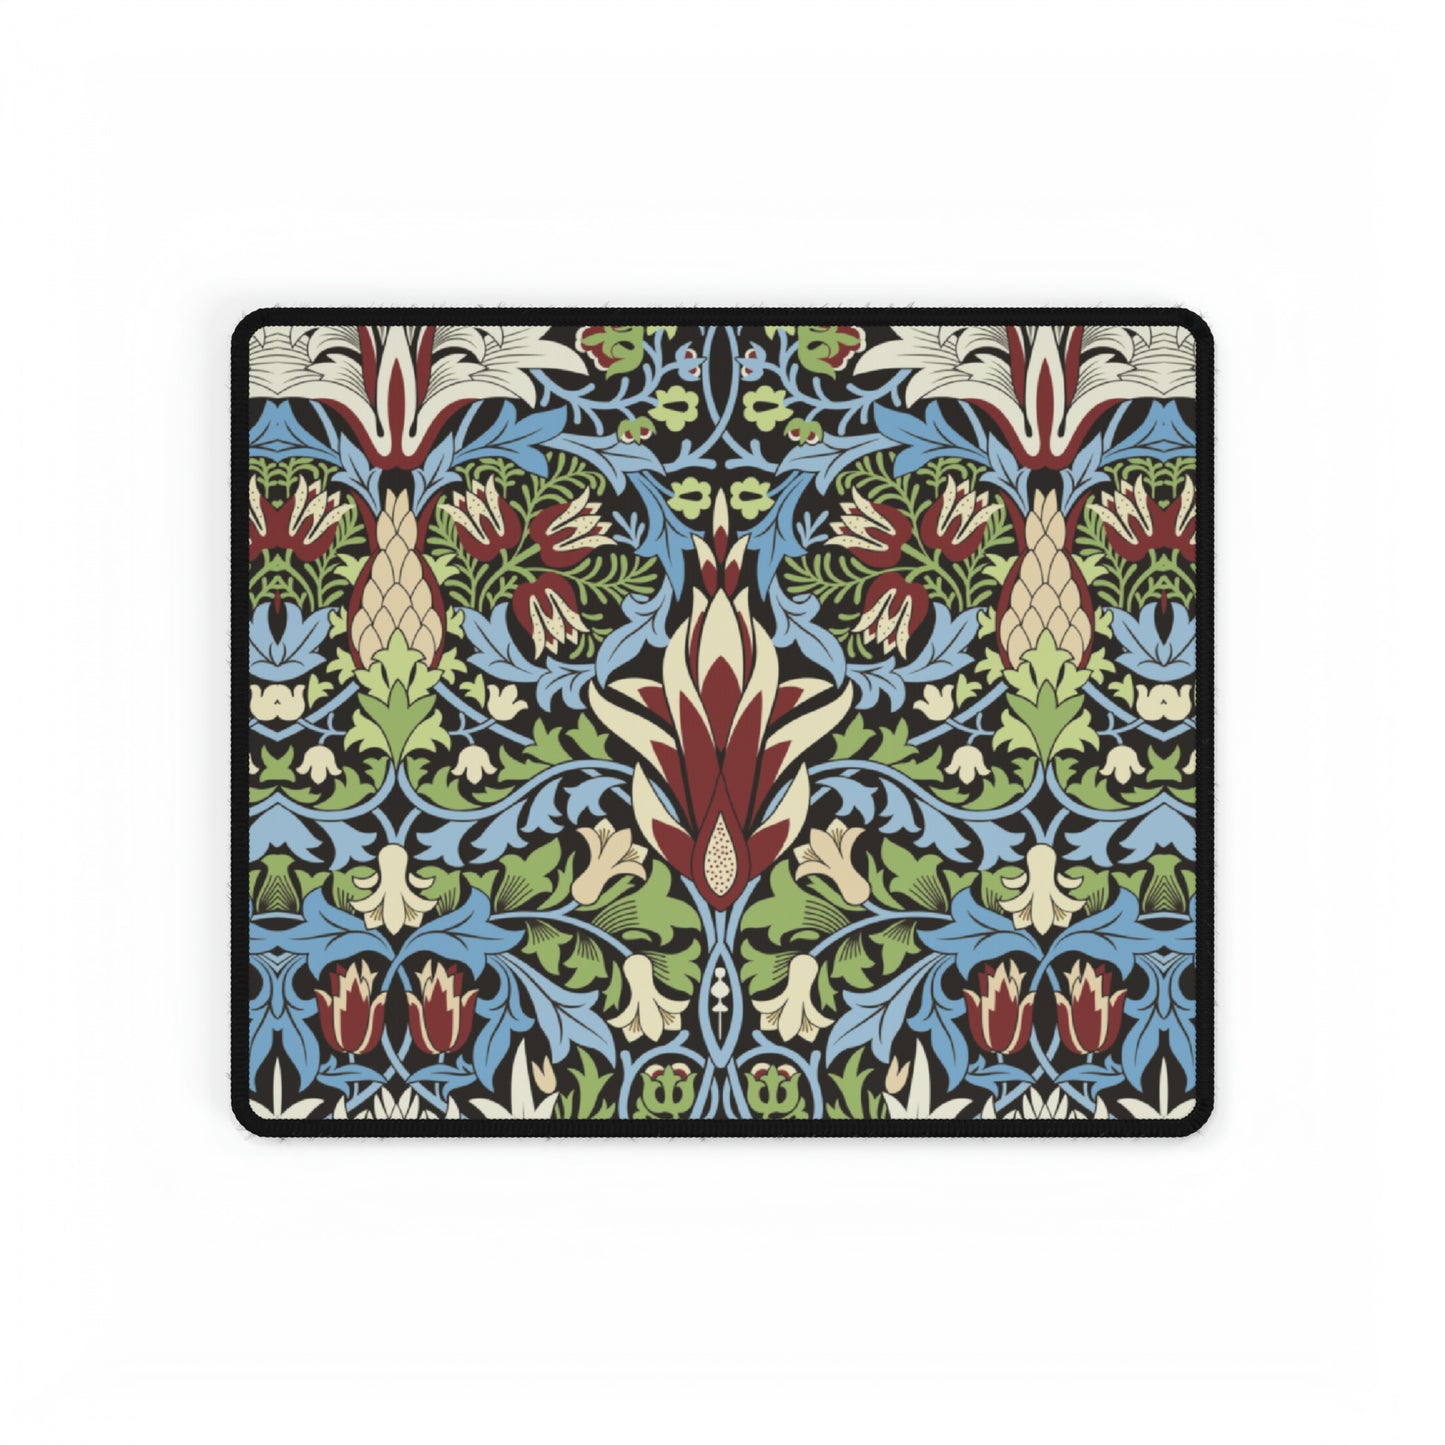 william-morris-co-desk-mat-snakeshead-collection-8